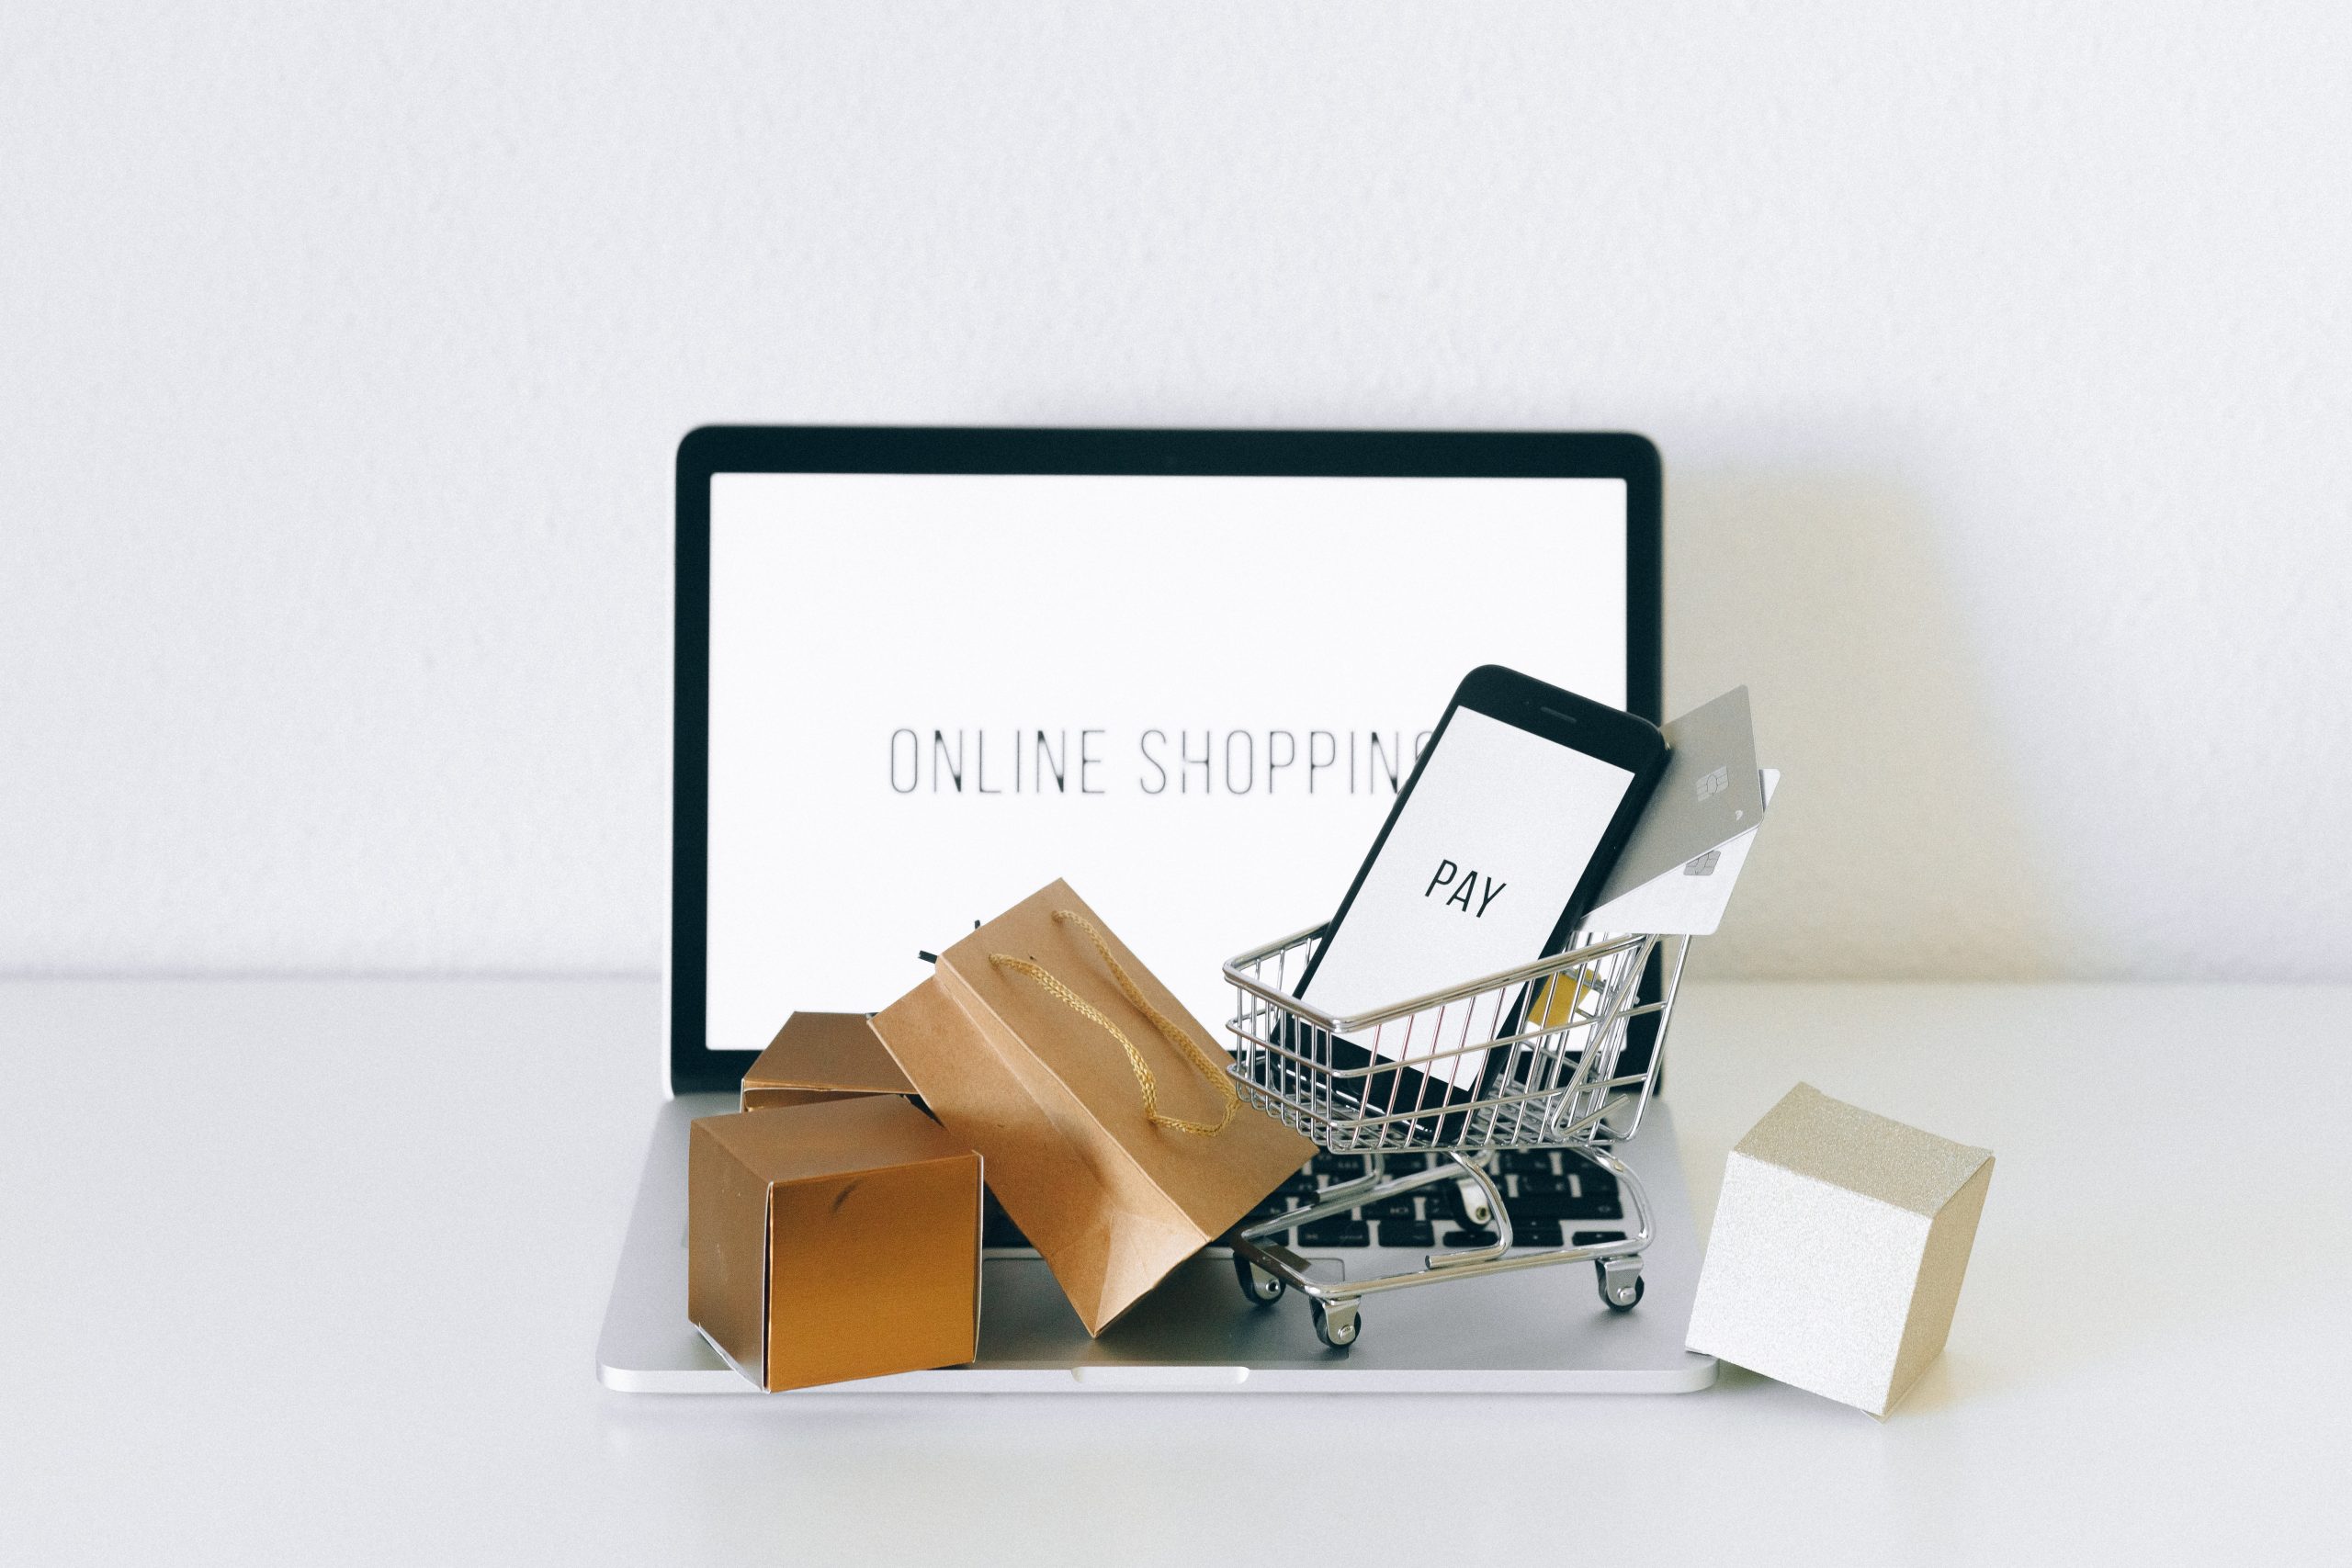 EXPLOSIVE: THE GROWTH OF E-COMMERCE AND ITS IMPACT ON THE RETAIL INDUSTRY